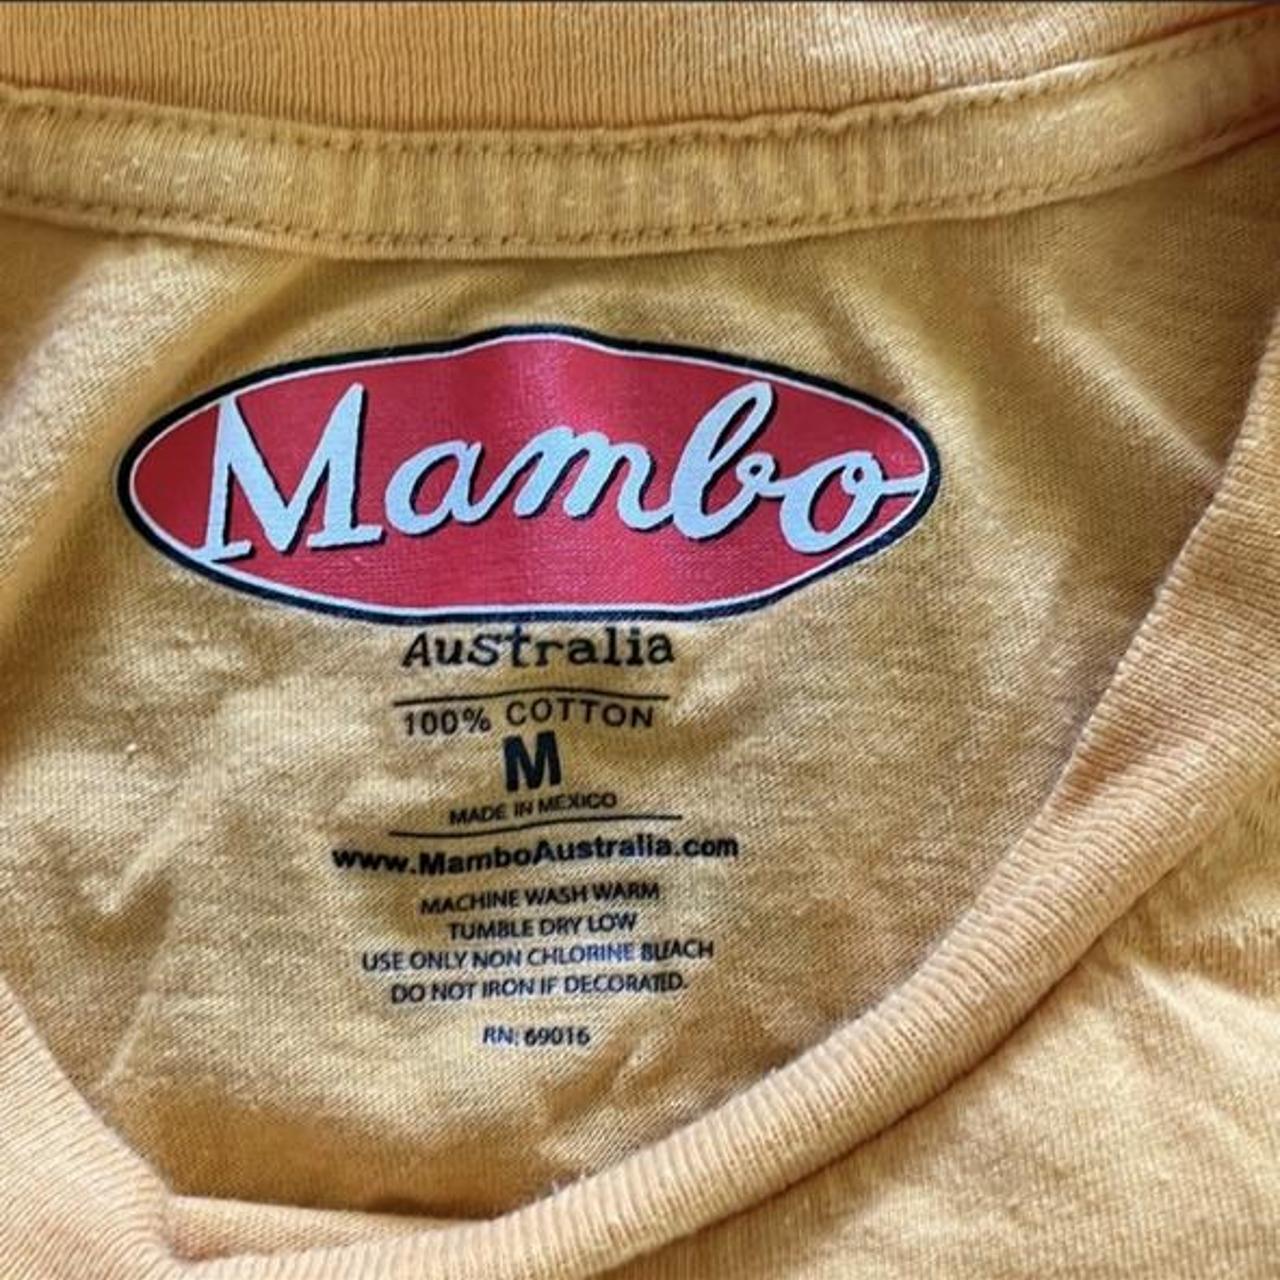 Product Image 2 - Mambo Australia T-Shirt

New without tags
Measures